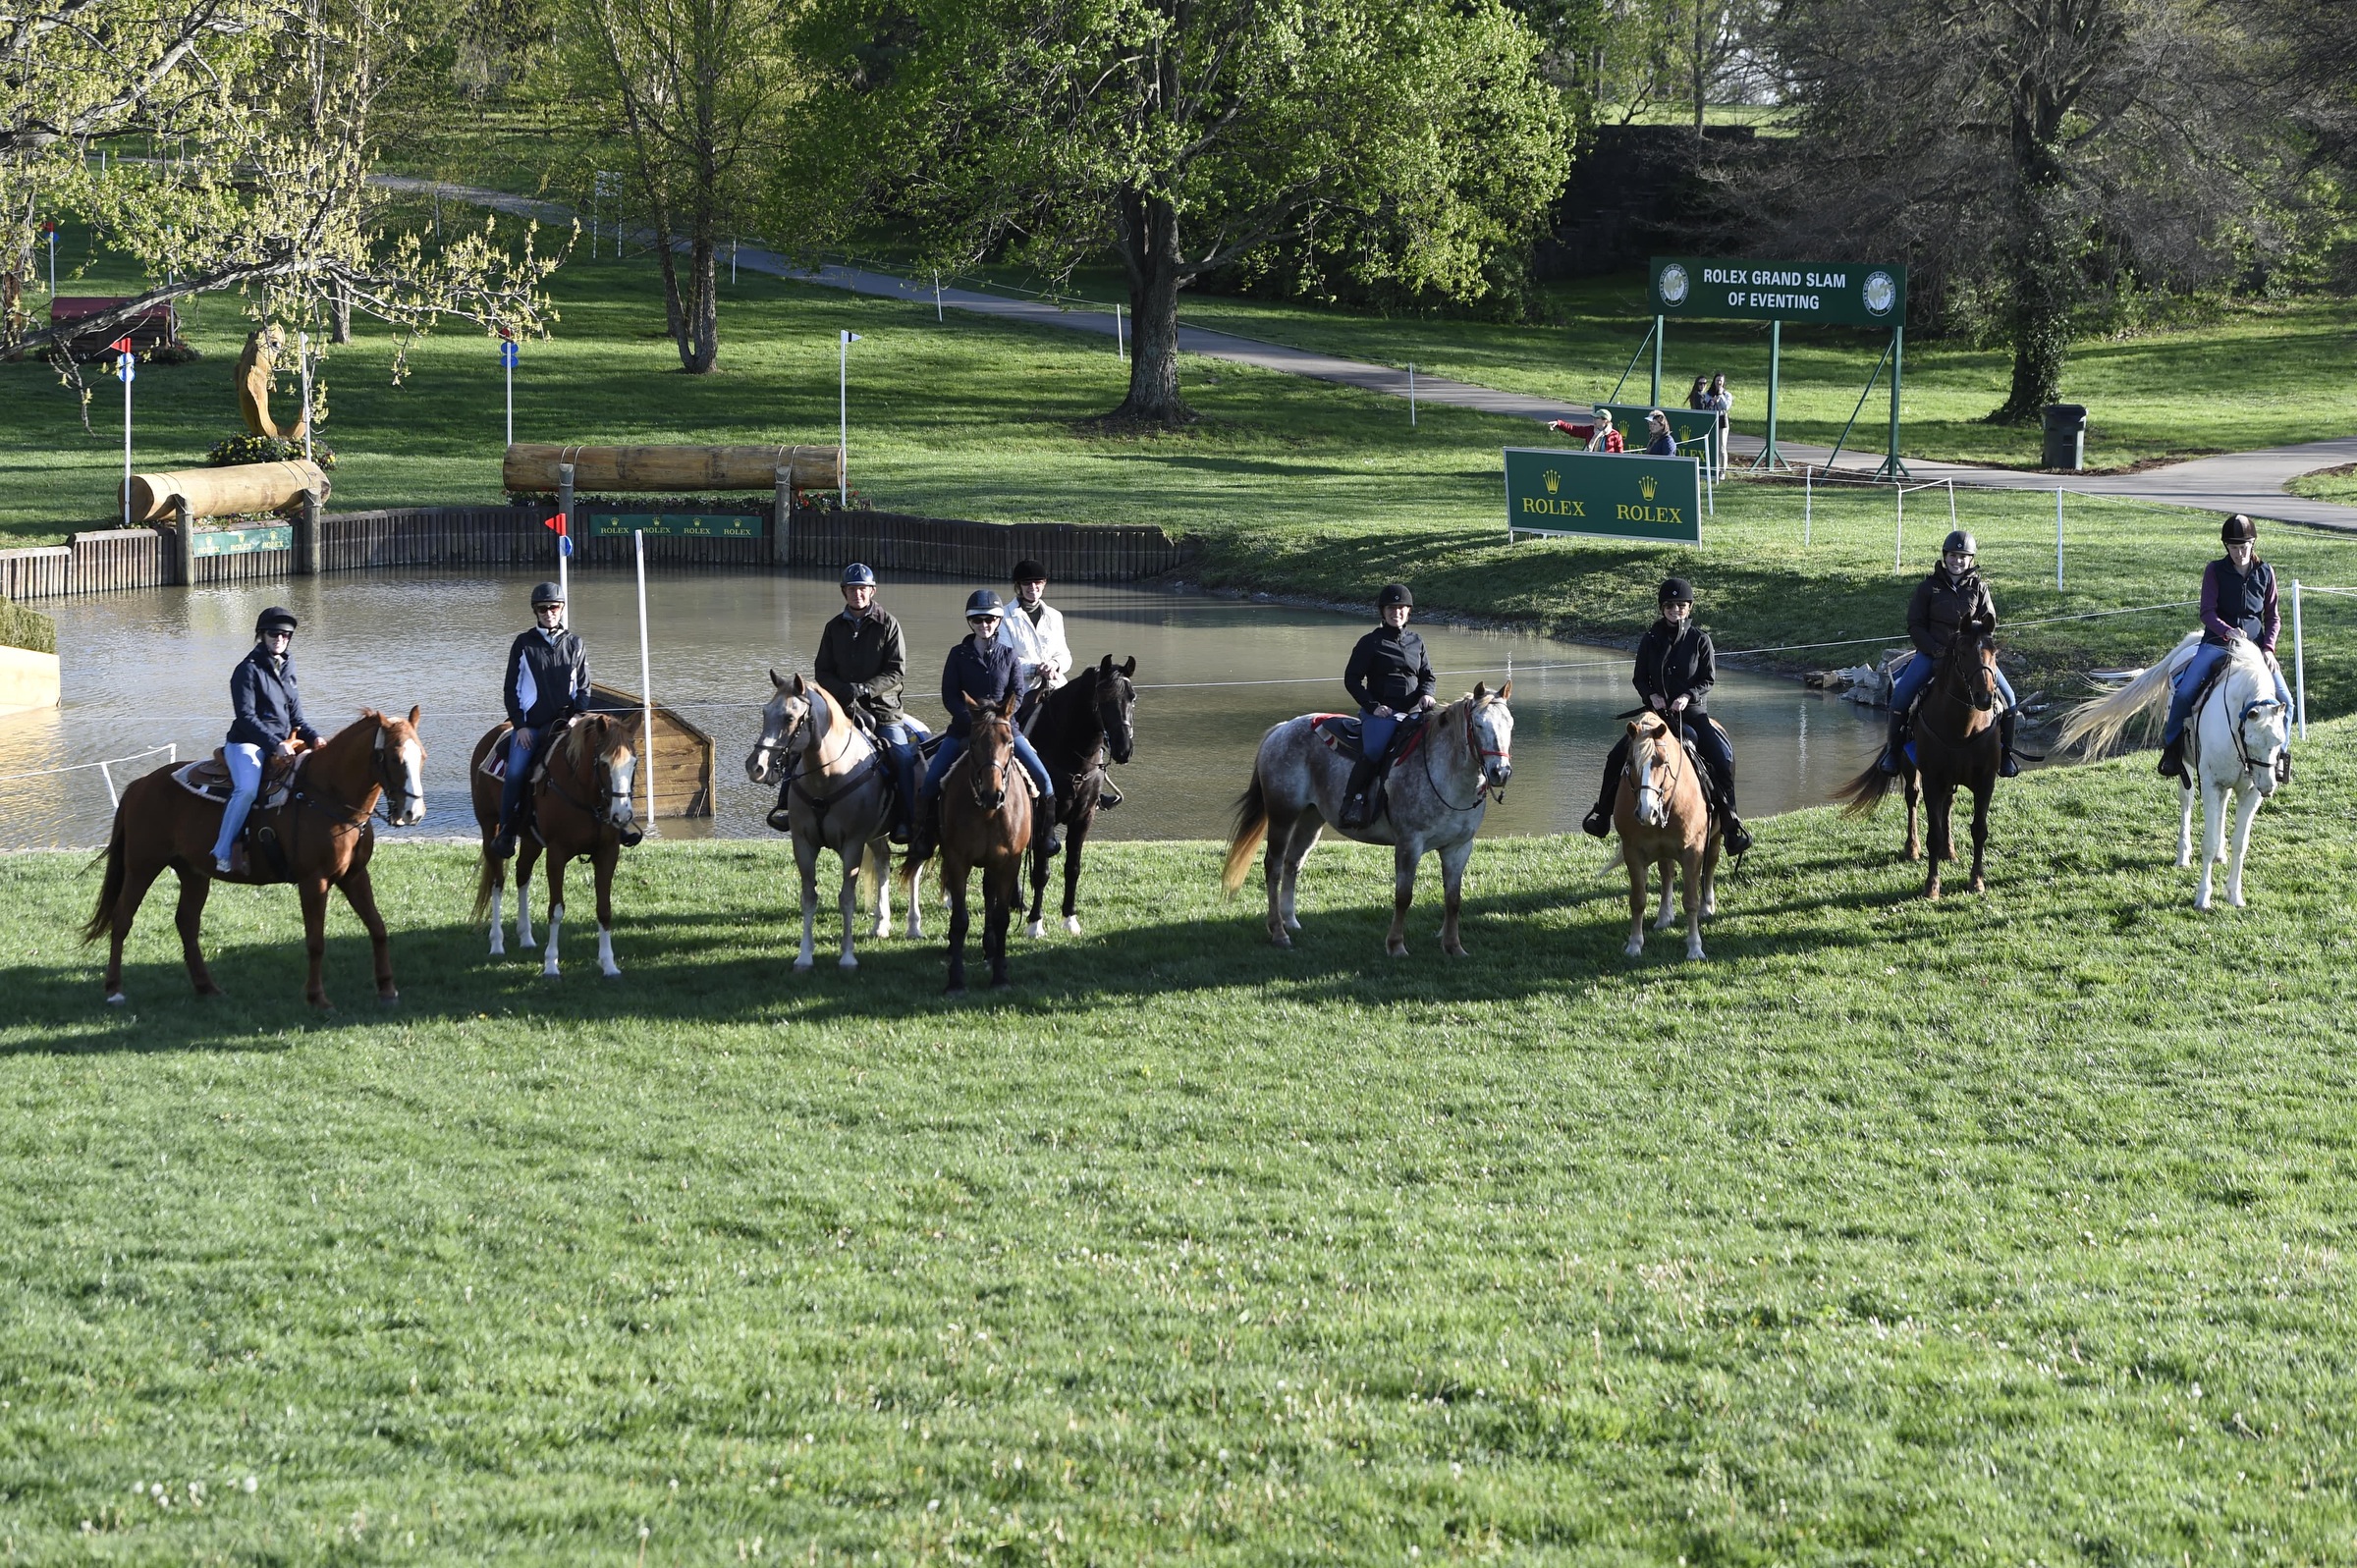 Olympic gold medalist Leslie Law, third from left, escorted the riding writers on a preview tour of the Rolex Kentucky Three-Day Event cross-country course. Sidelines writer Susan Friedland-Smith is second from the left. (Photo courtesy of Rolex)